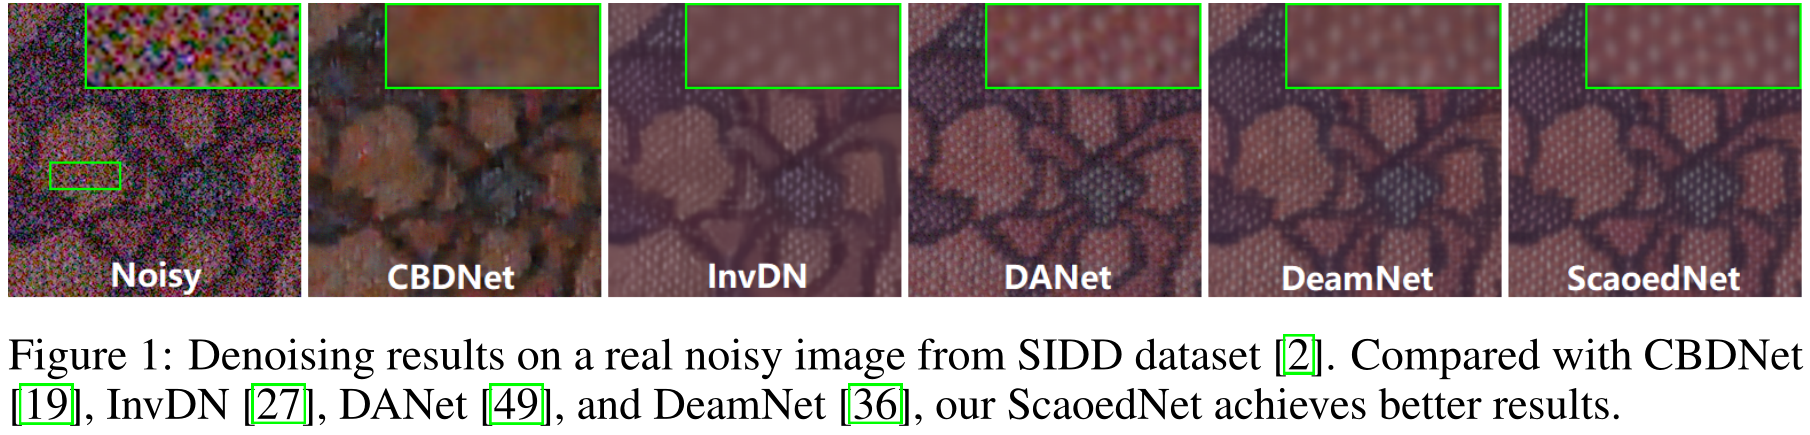 Denoising results on SIDD.png